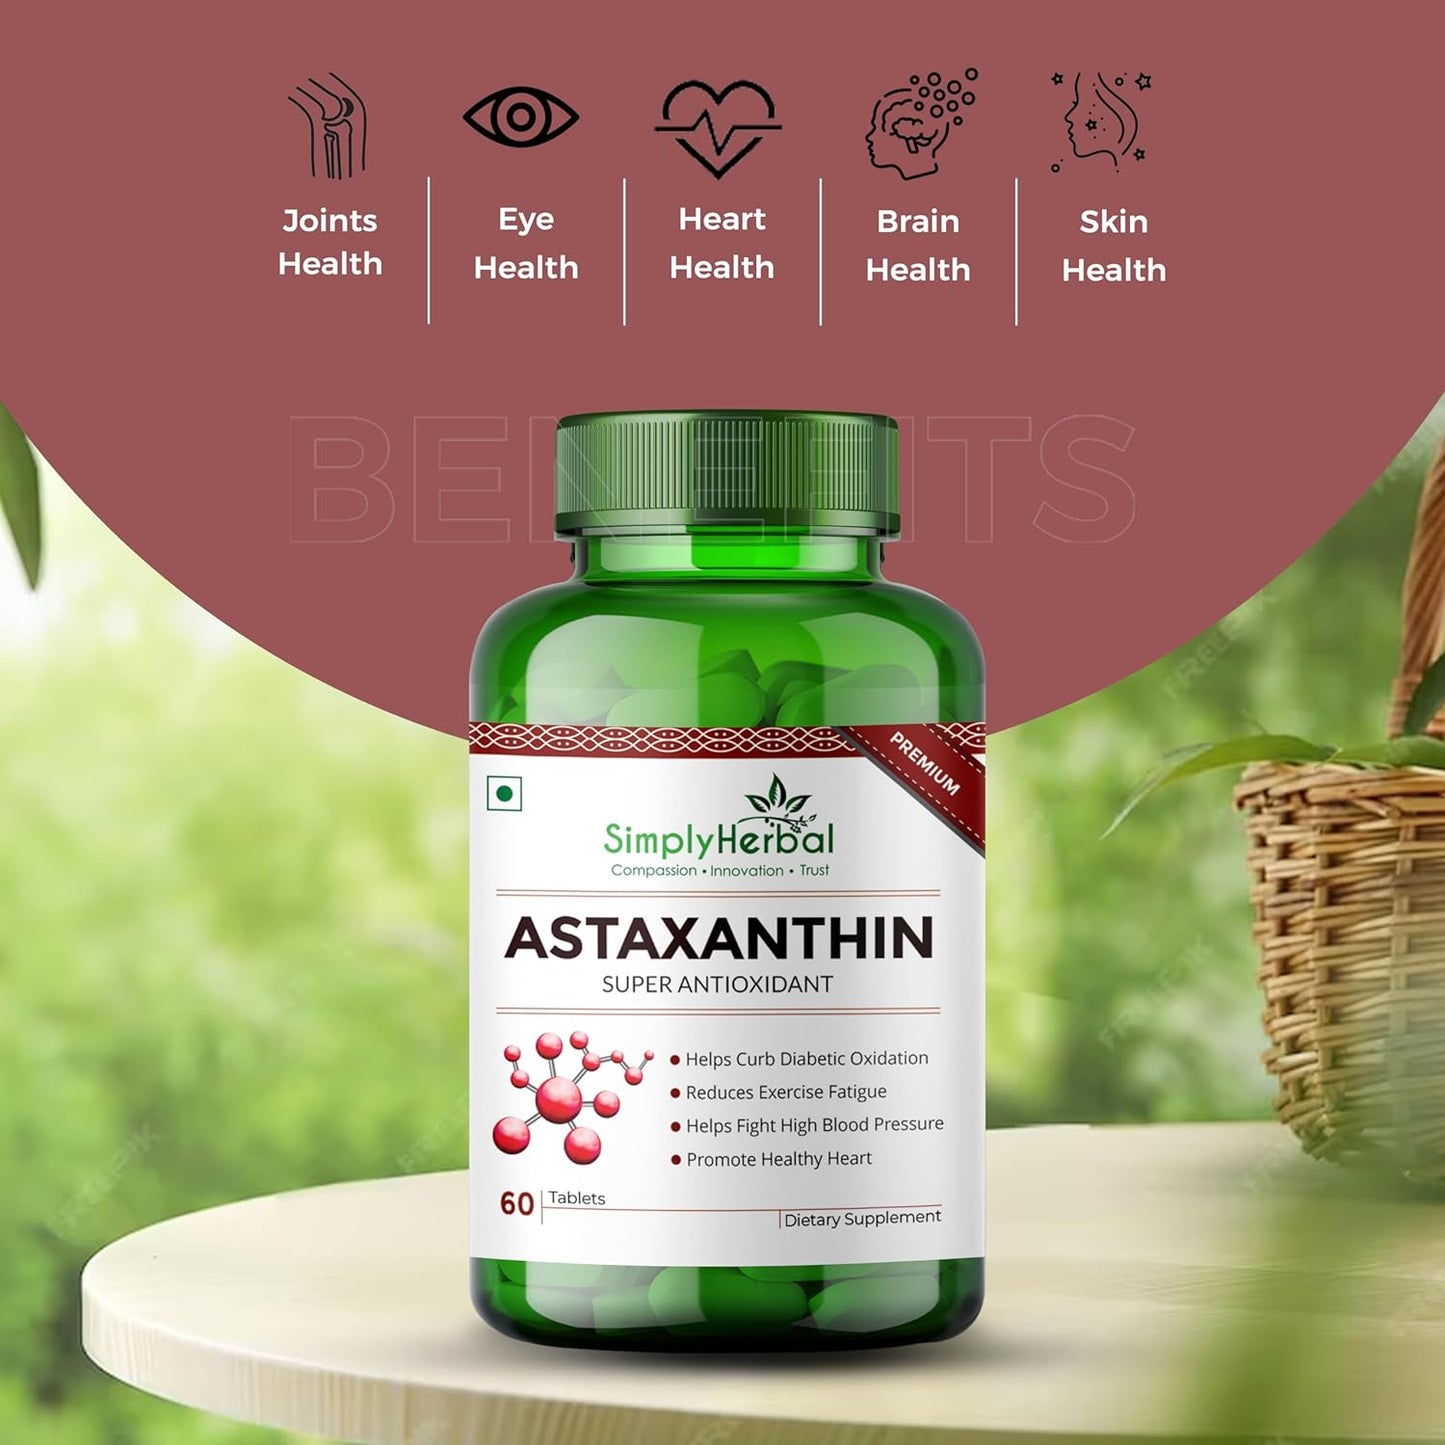 Simply Herbal Astaxanthin Supplement Tablets - 60 Tablets